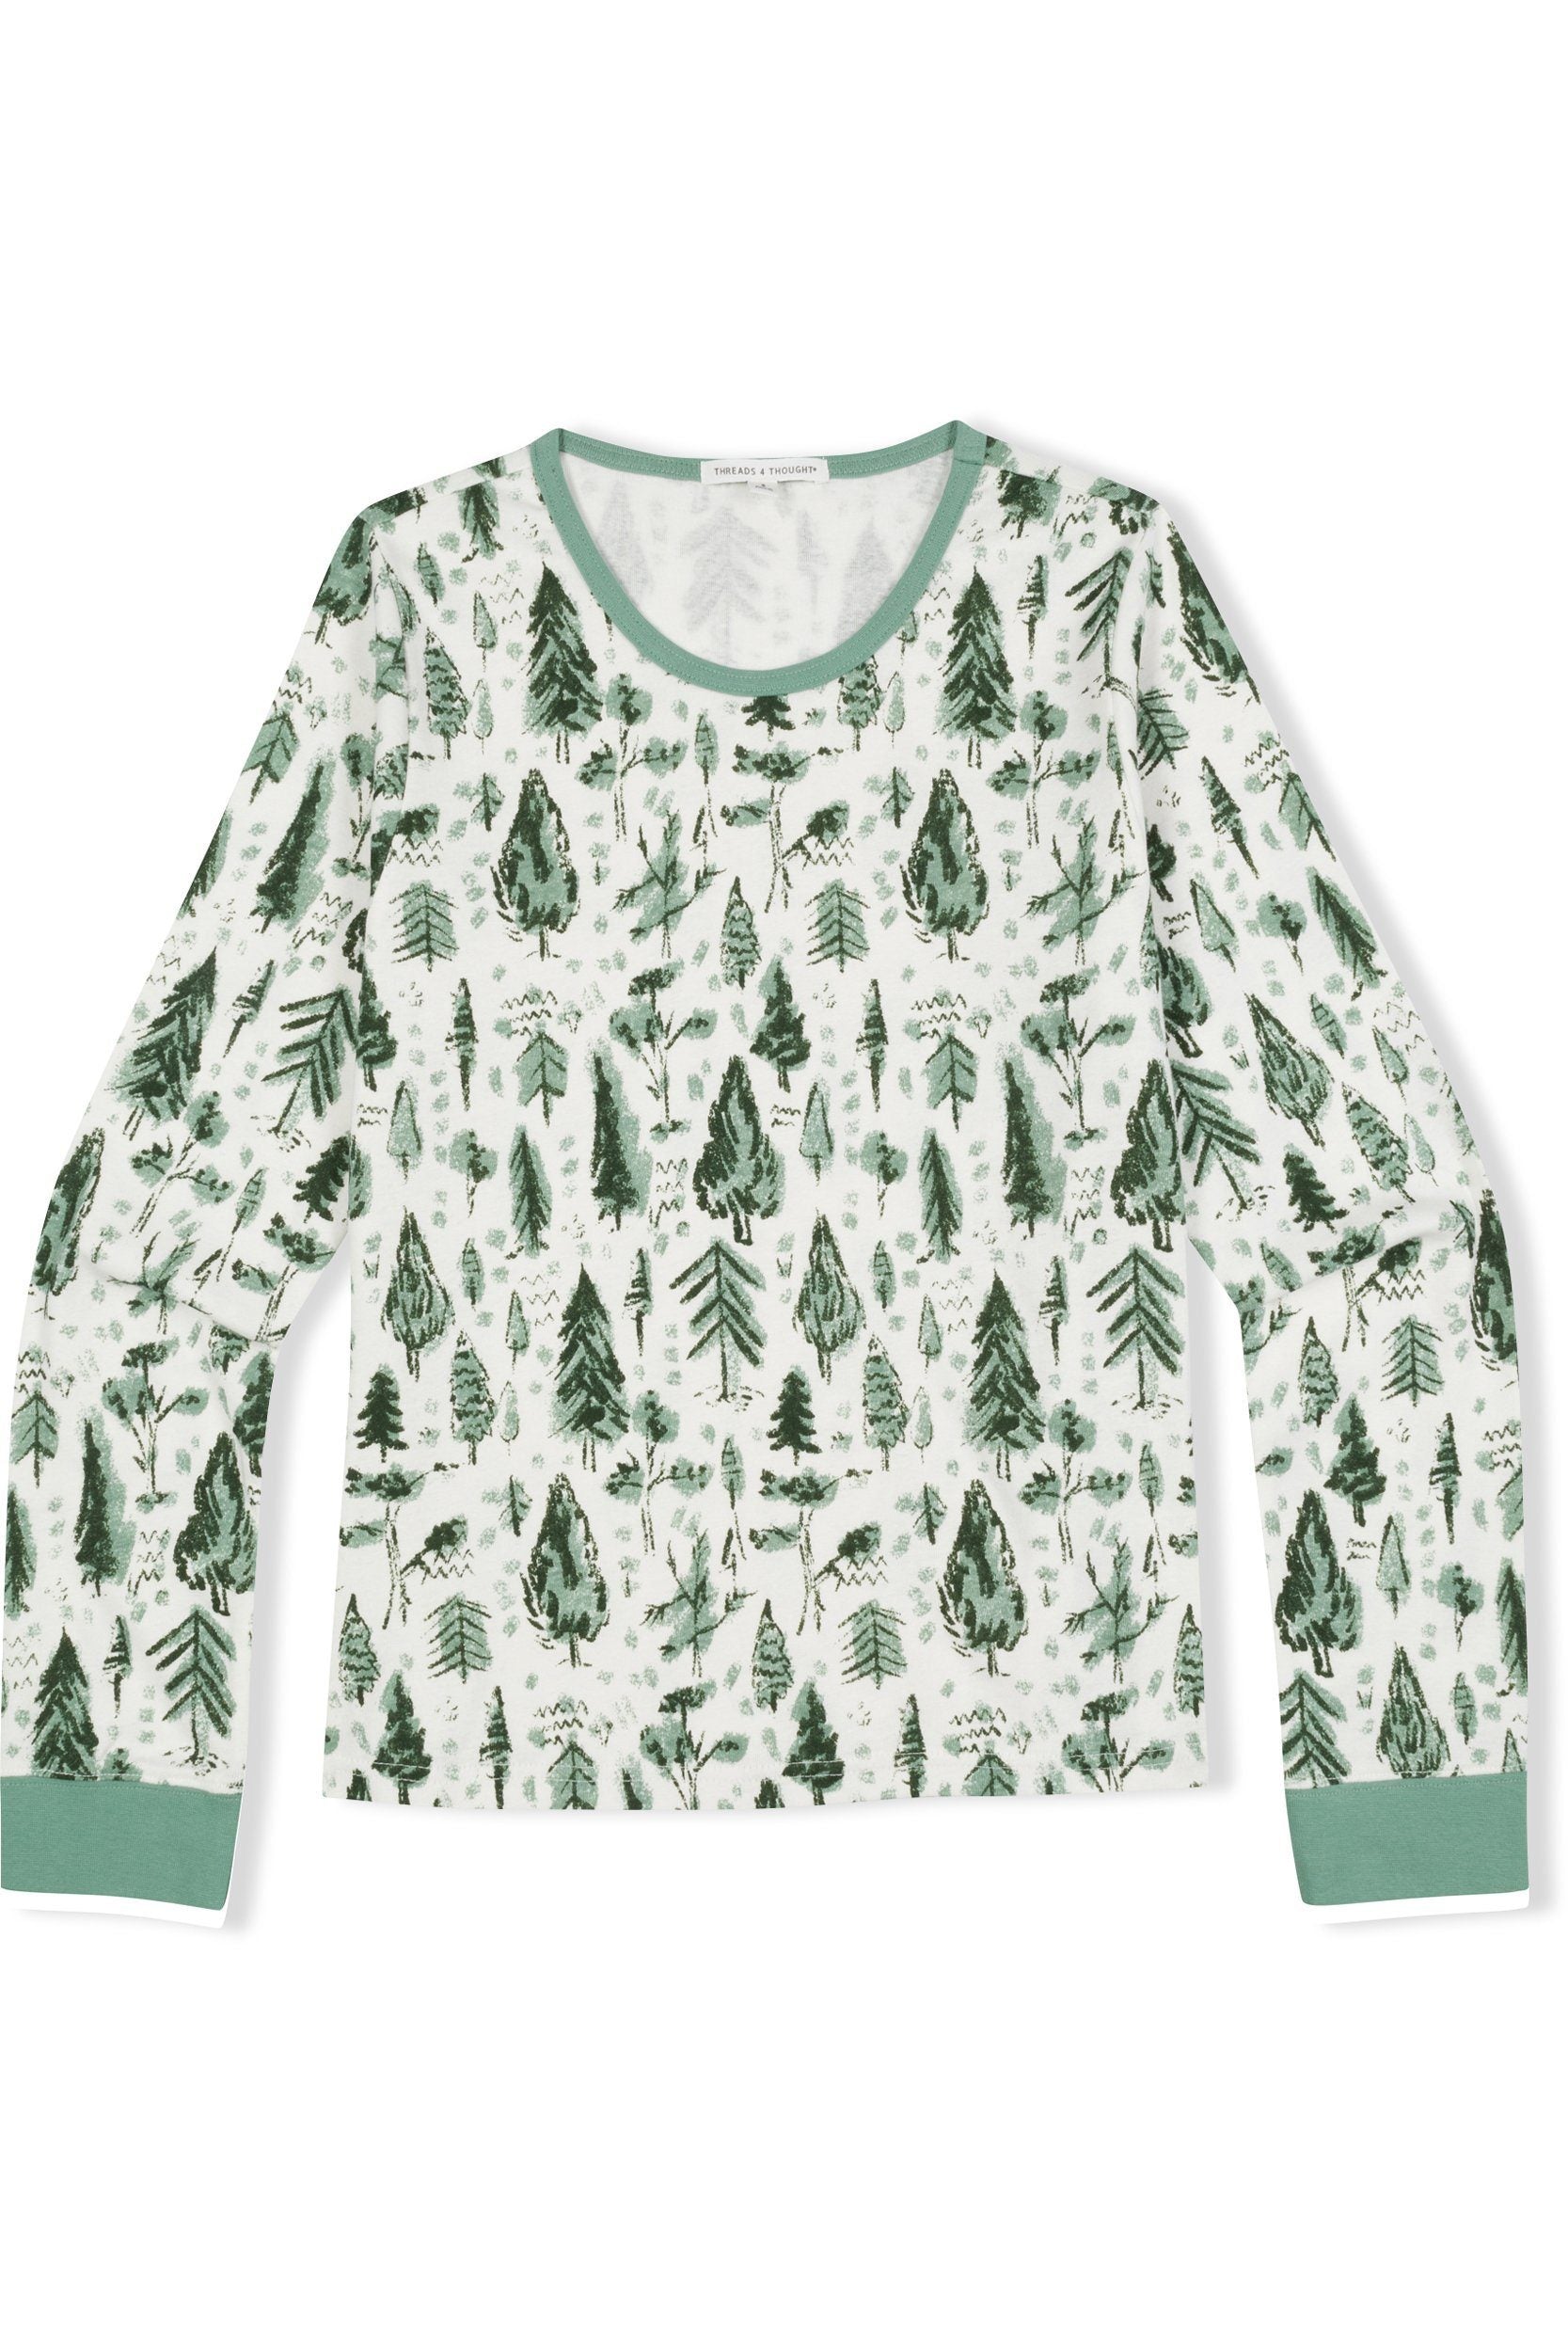 Women's Holiday Pajama Set – Threads 4 Thought